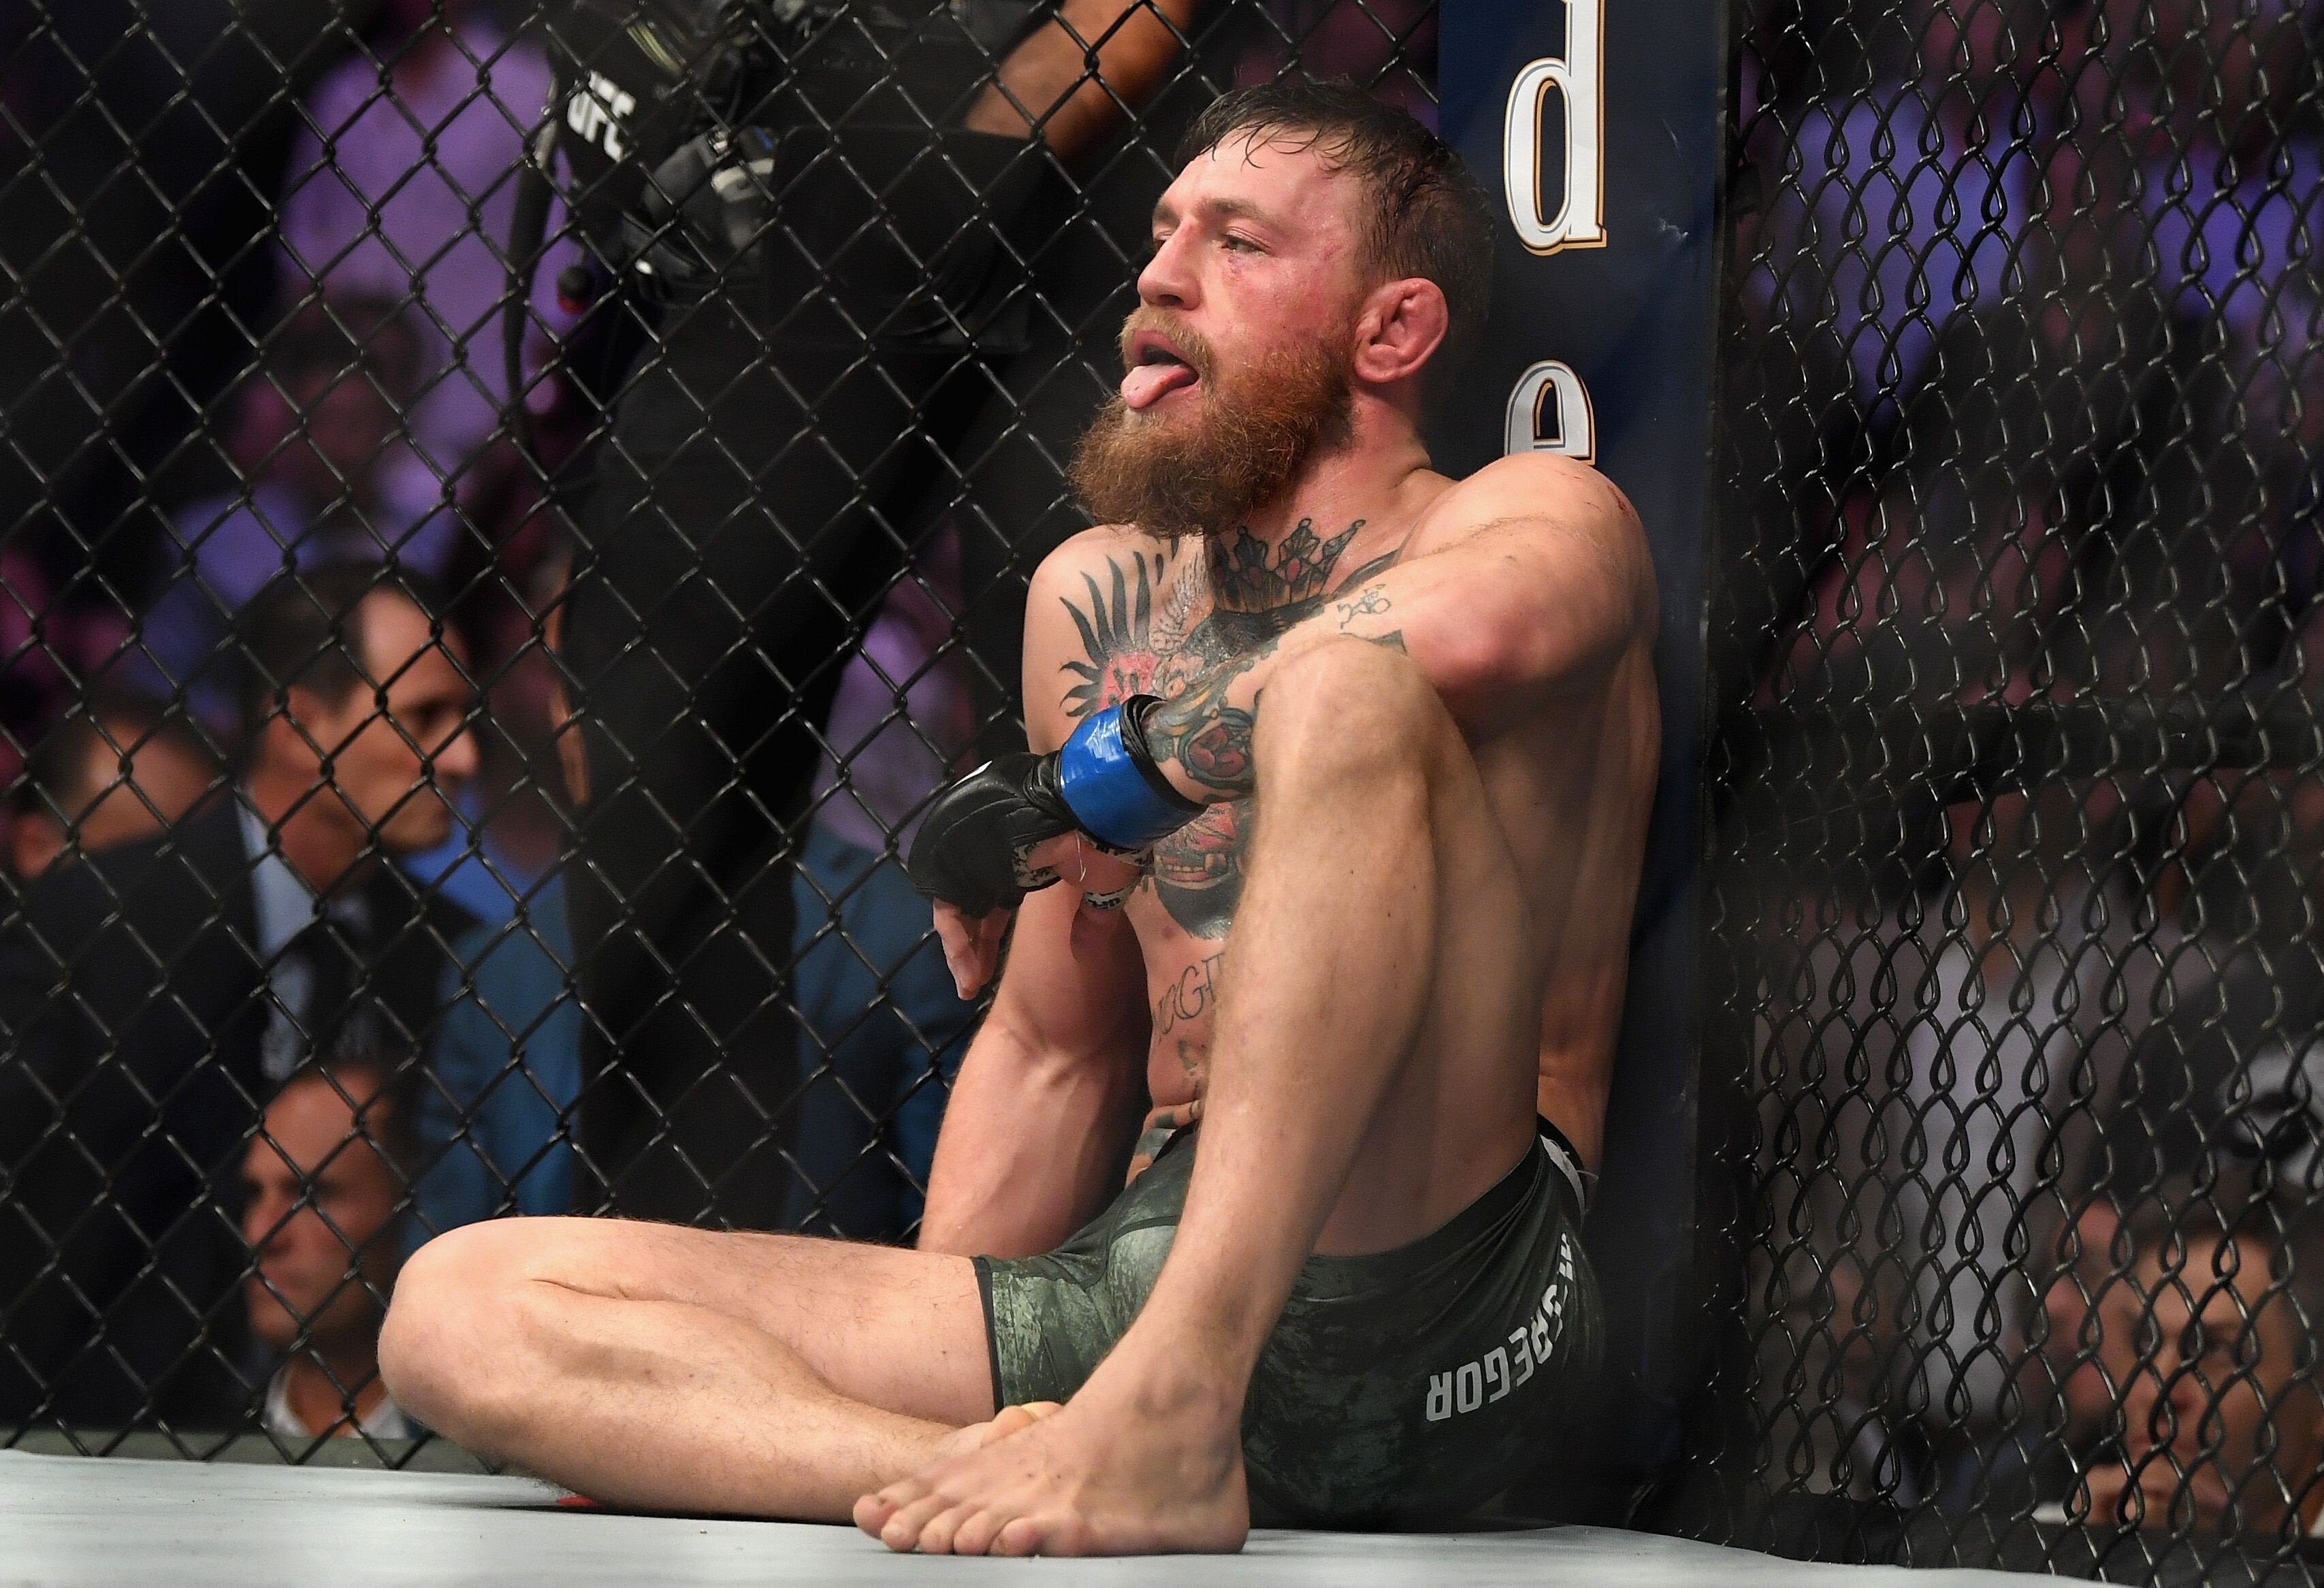 Conor McGregor sits in the octagon after being defeated by Khabib Nurmagomedov’s fourth-round submission in their UFC lightweight title fight at UFC 229 in the T-Mobile Arena, Las Vegas in 2018. Photo: AFP